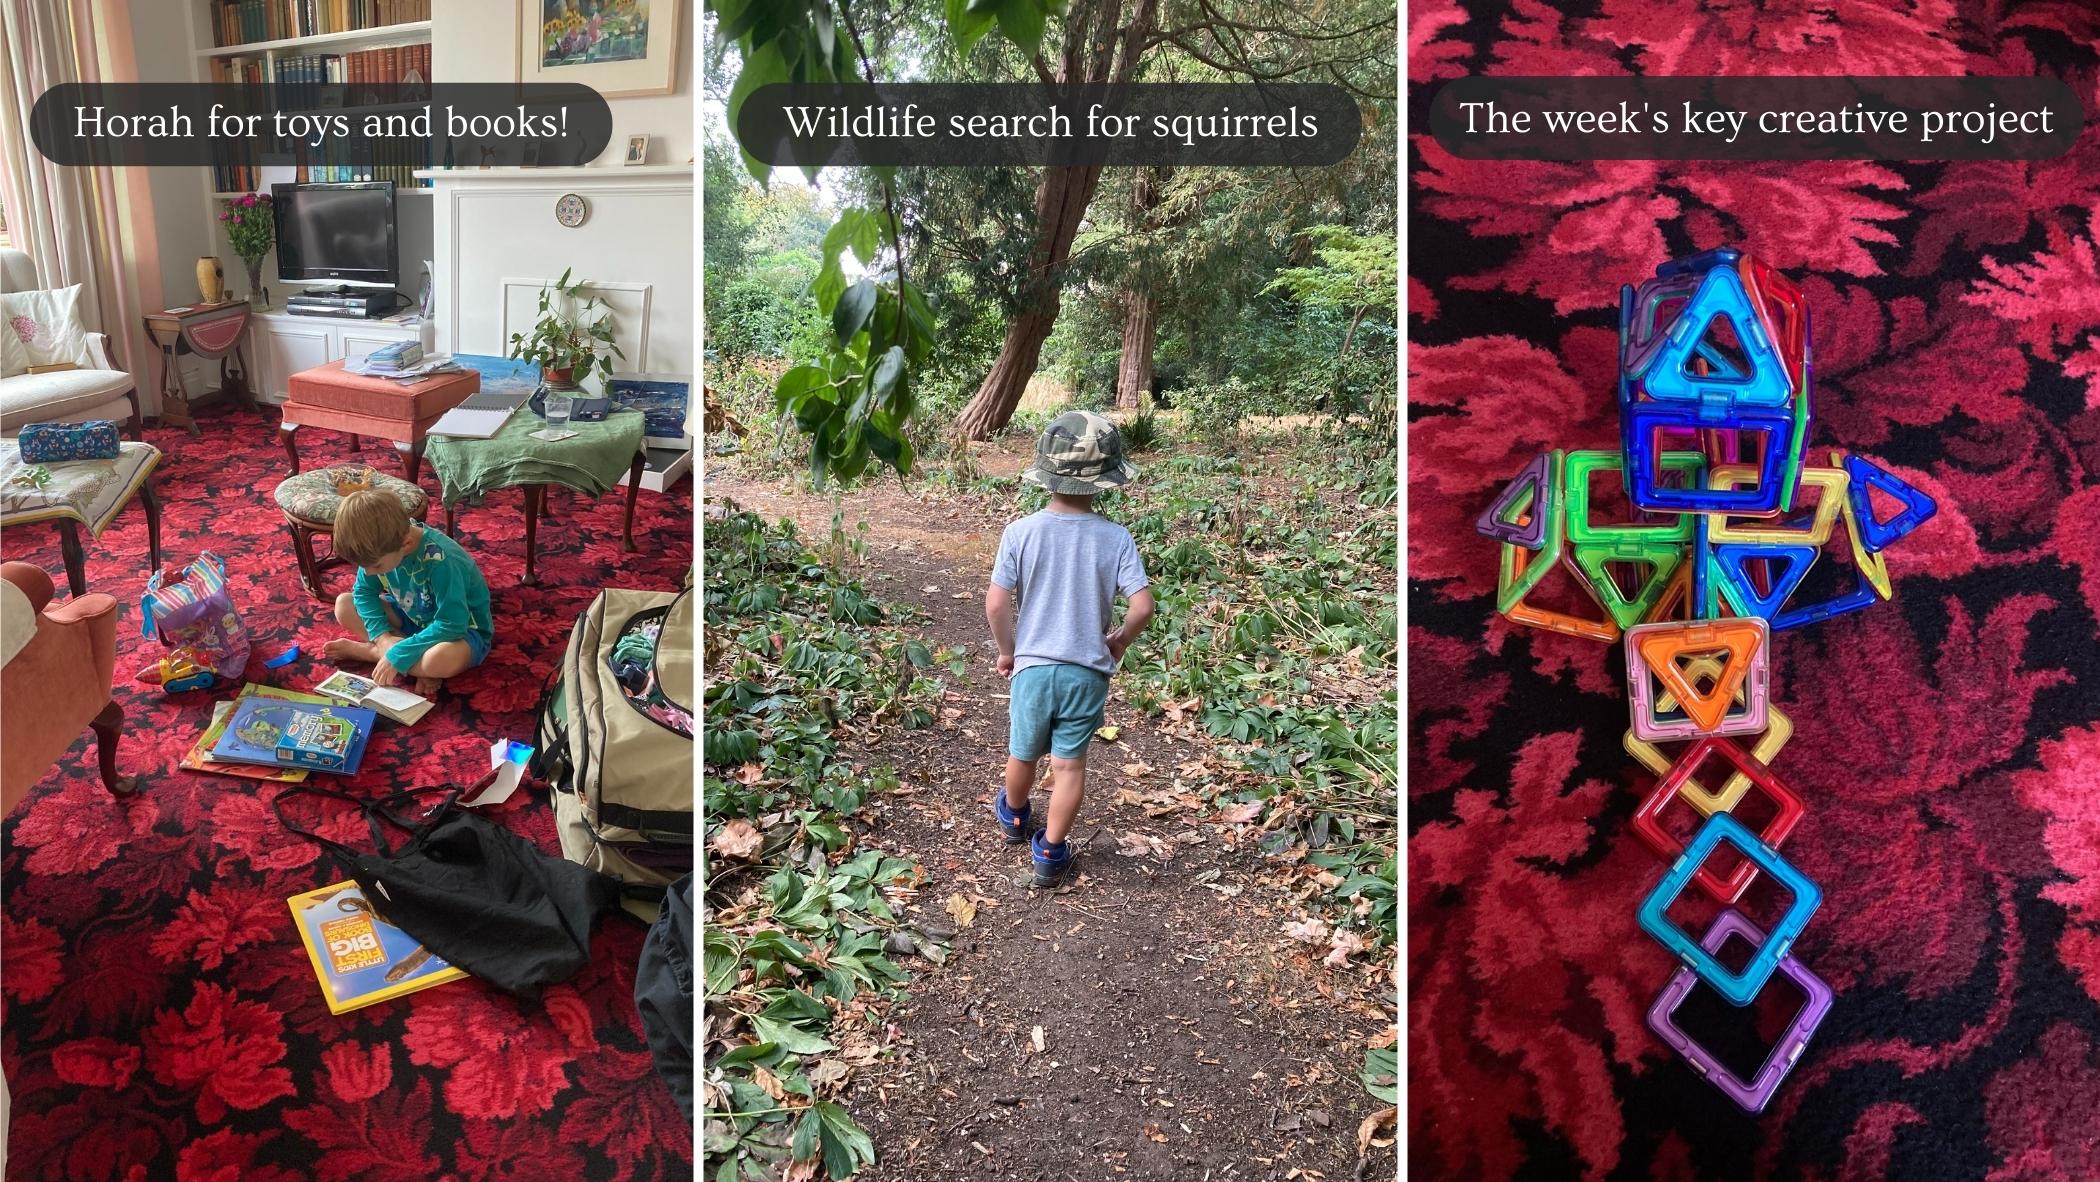 Sequence of three photos: one with child sat on floor 'Horah for toys and books', second with child walking through woods 'Wildlife search for squirrels', and third of magnetic building blocks 'The week's key creative project'.